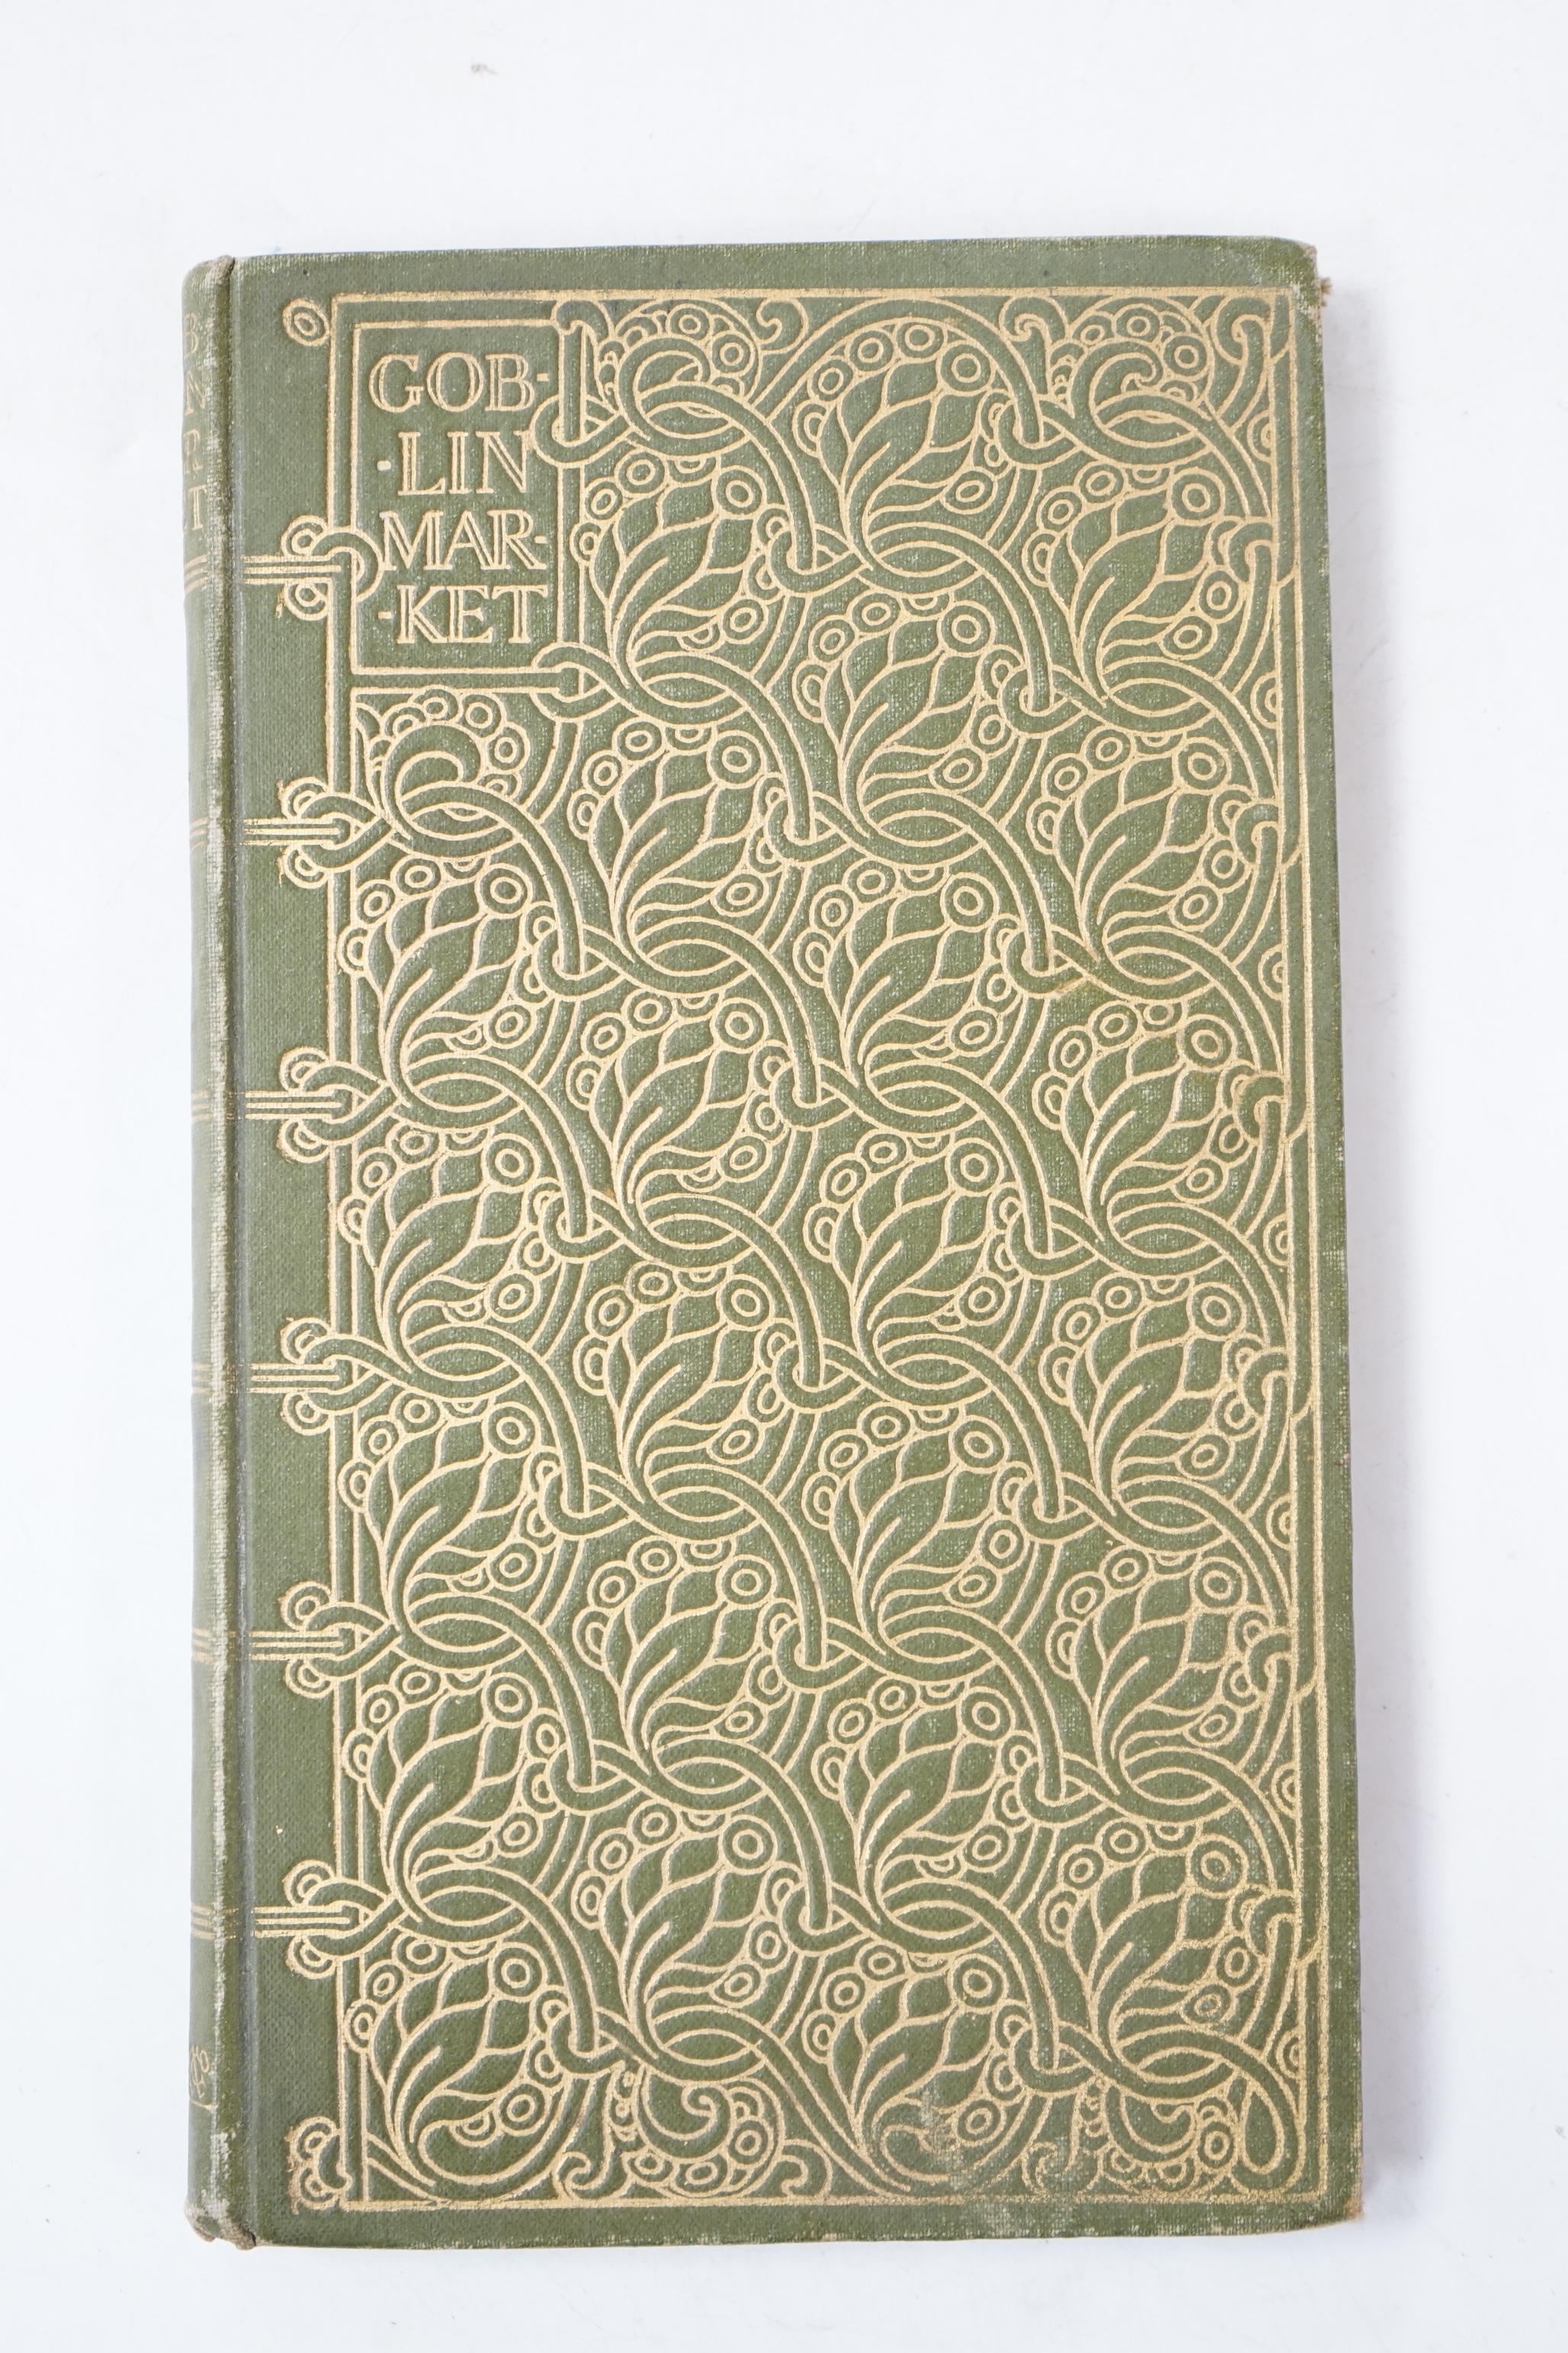 Rossetti, Christina - Goblin Market, 1st edition, illustrated with 12 full-page woodcuts by Laurence Houseman, narrow 12mo, original green and gilt decorative cloth, child's pencil scribbling to some blank pages, Macmill